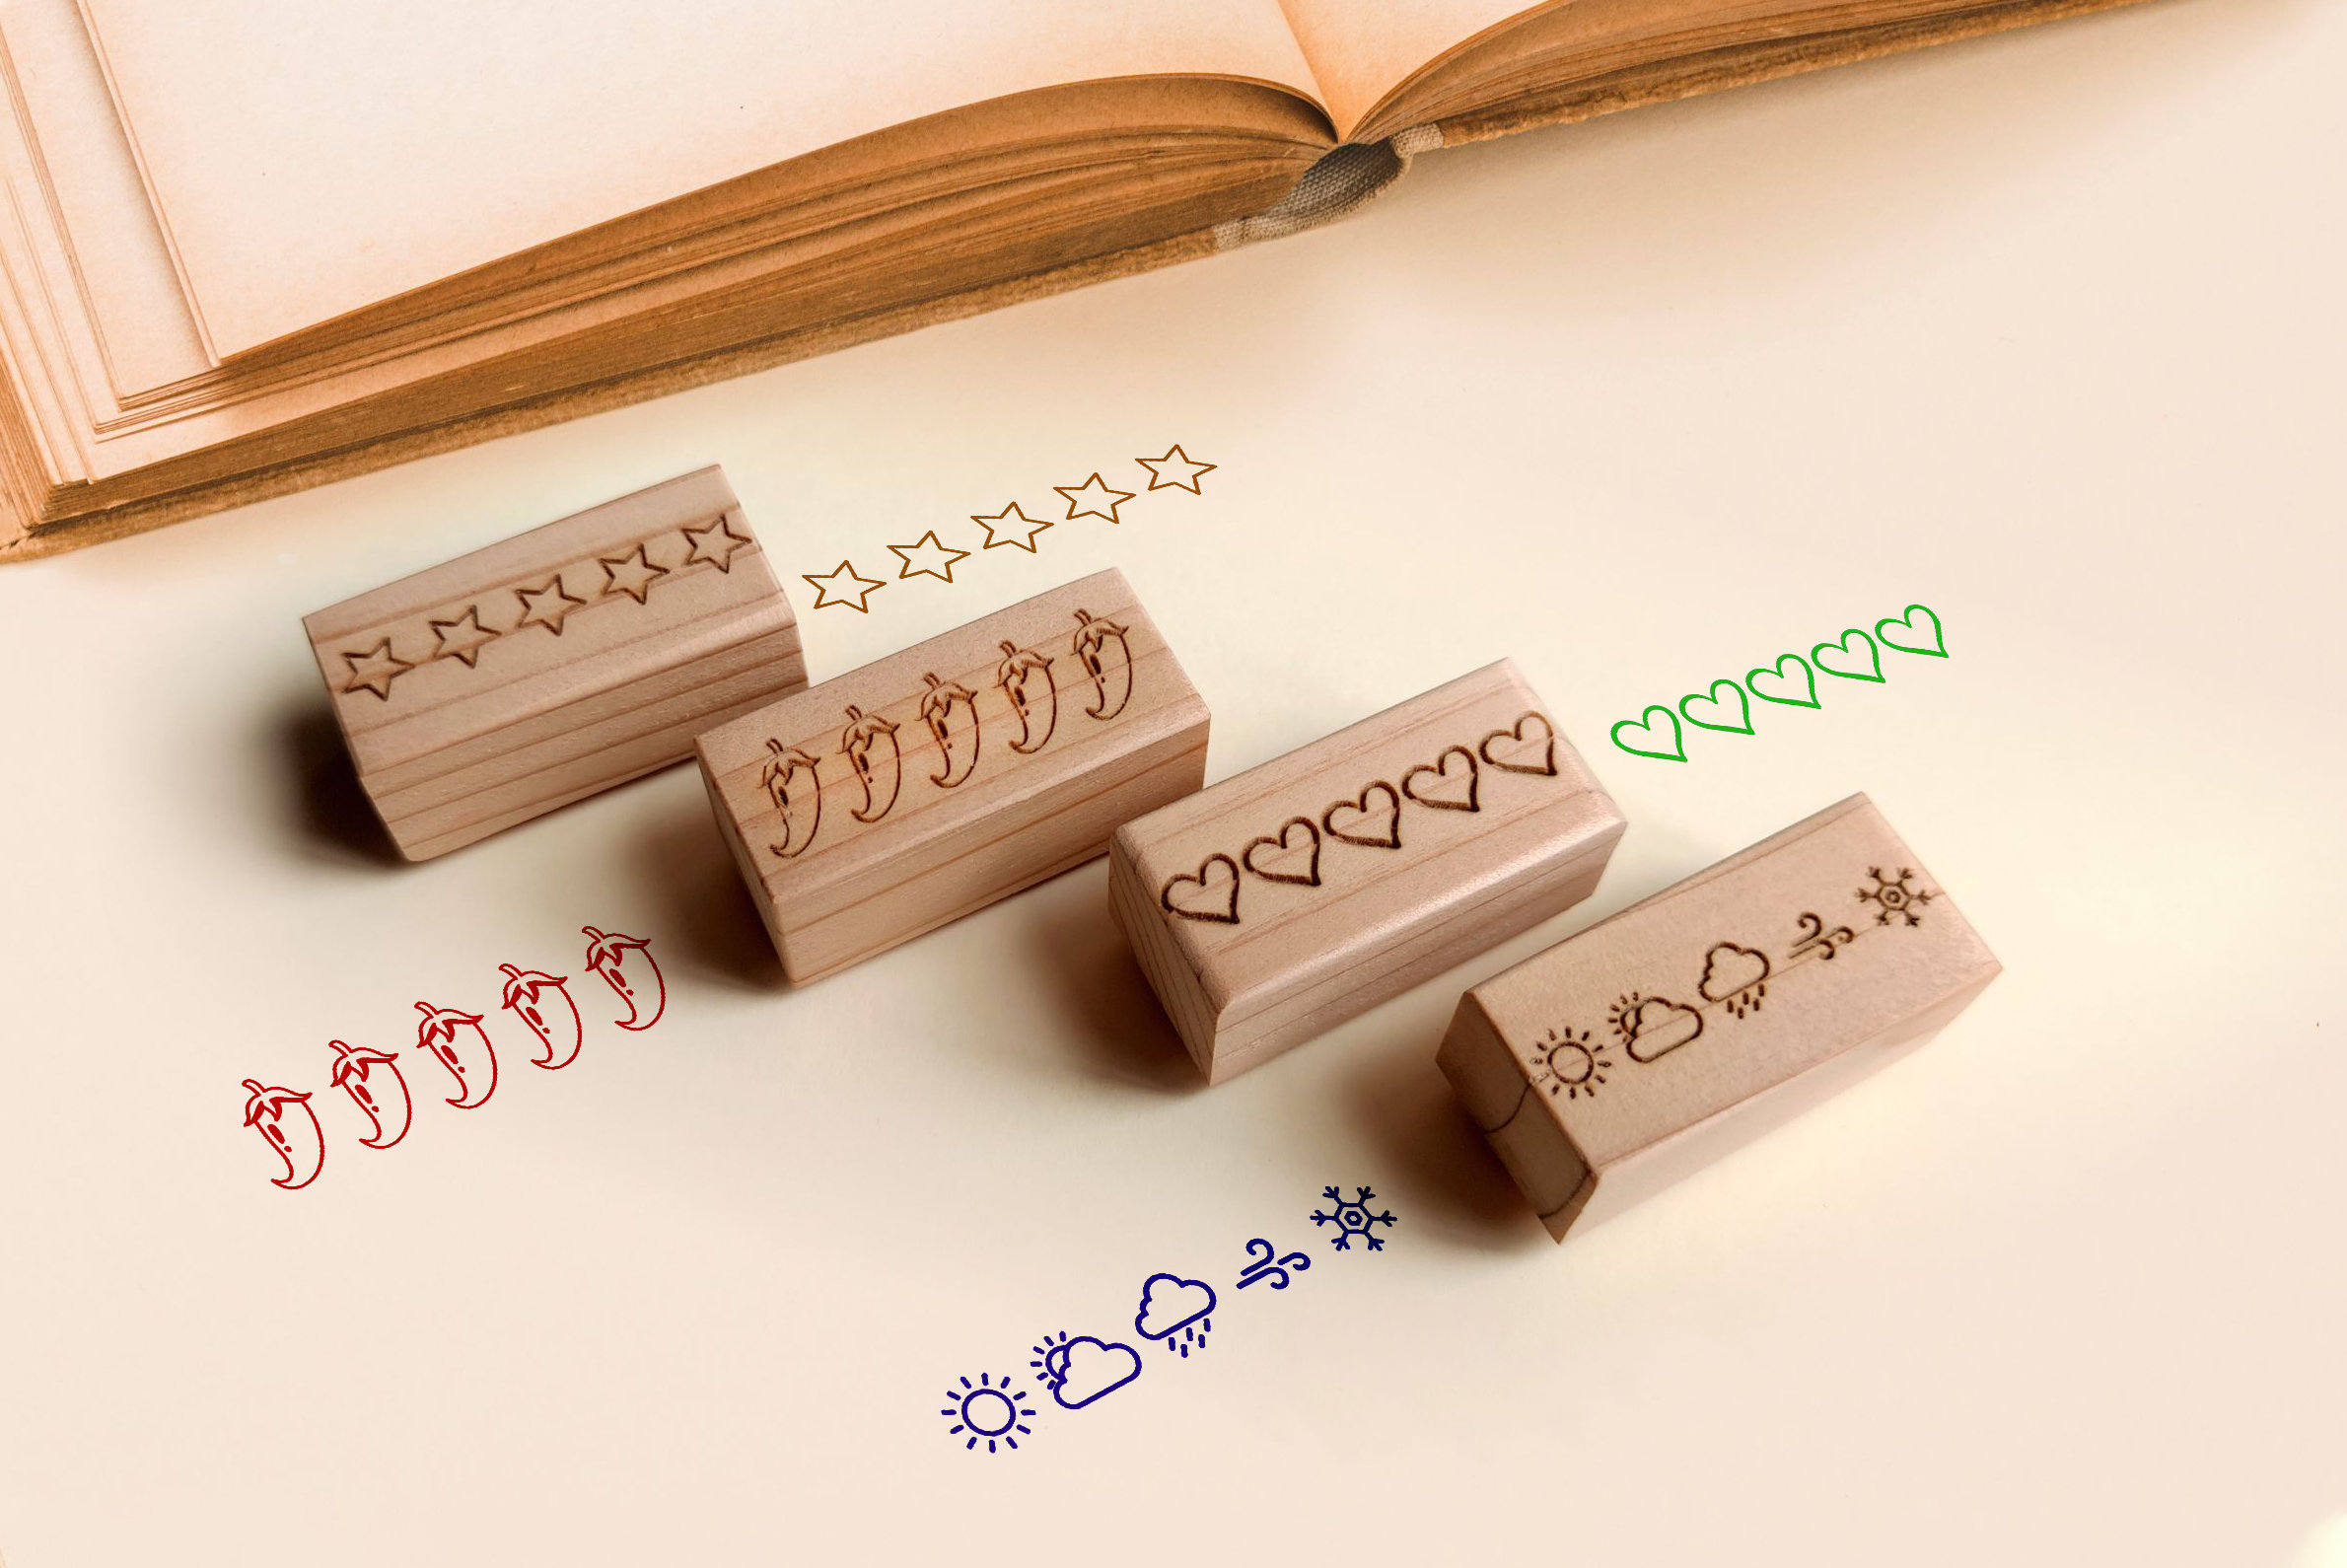 Rubber stamp - Rating with stars